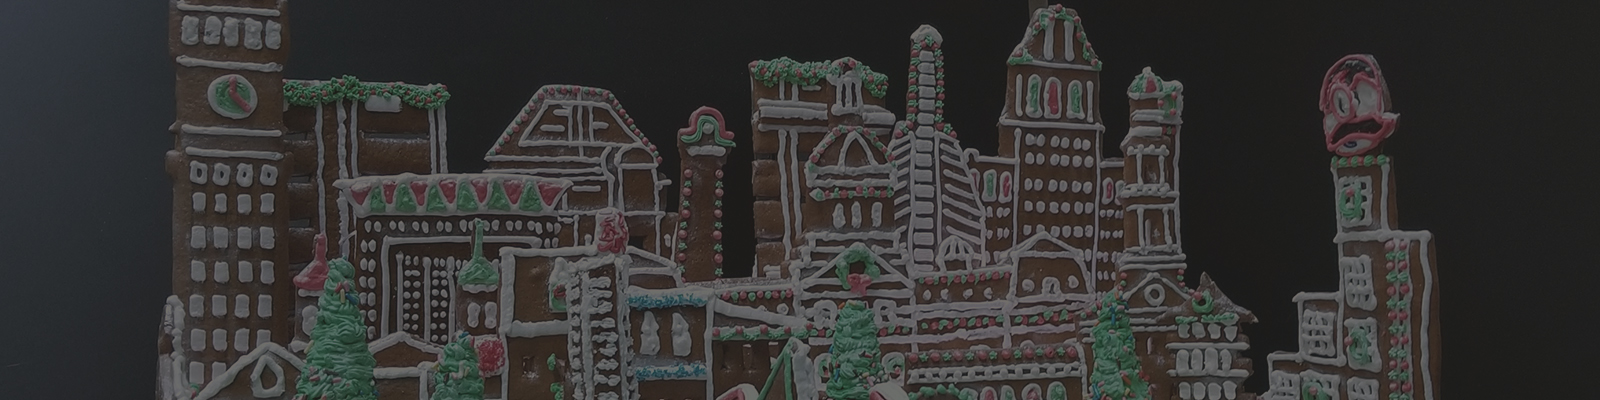 Gingerbread Architecture Design Competition